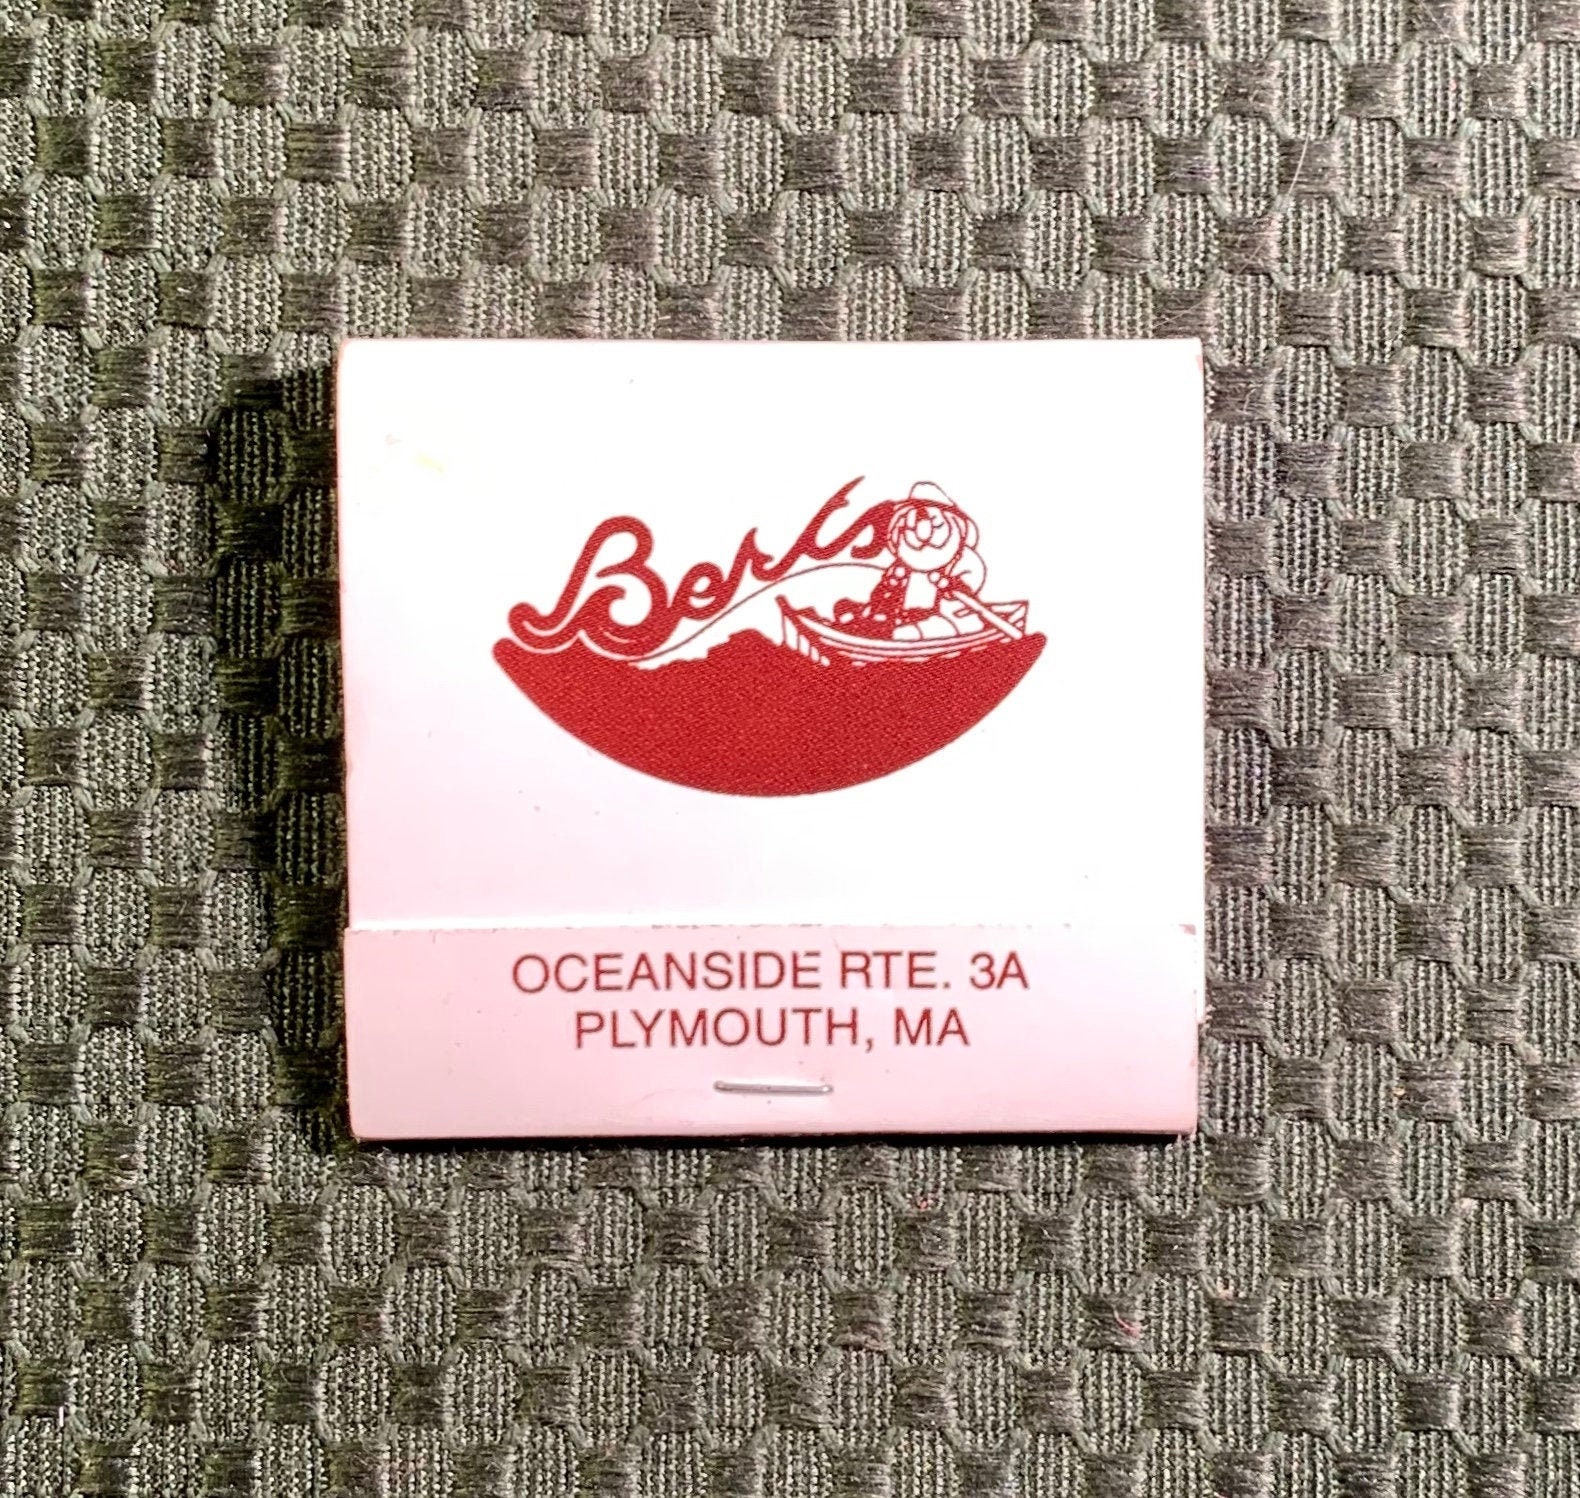 Vintage Matchbook, Berts Seafood Restaurant, Oceanside, Plymouth Ma, with All 28 Matches, Free Ship in Usa